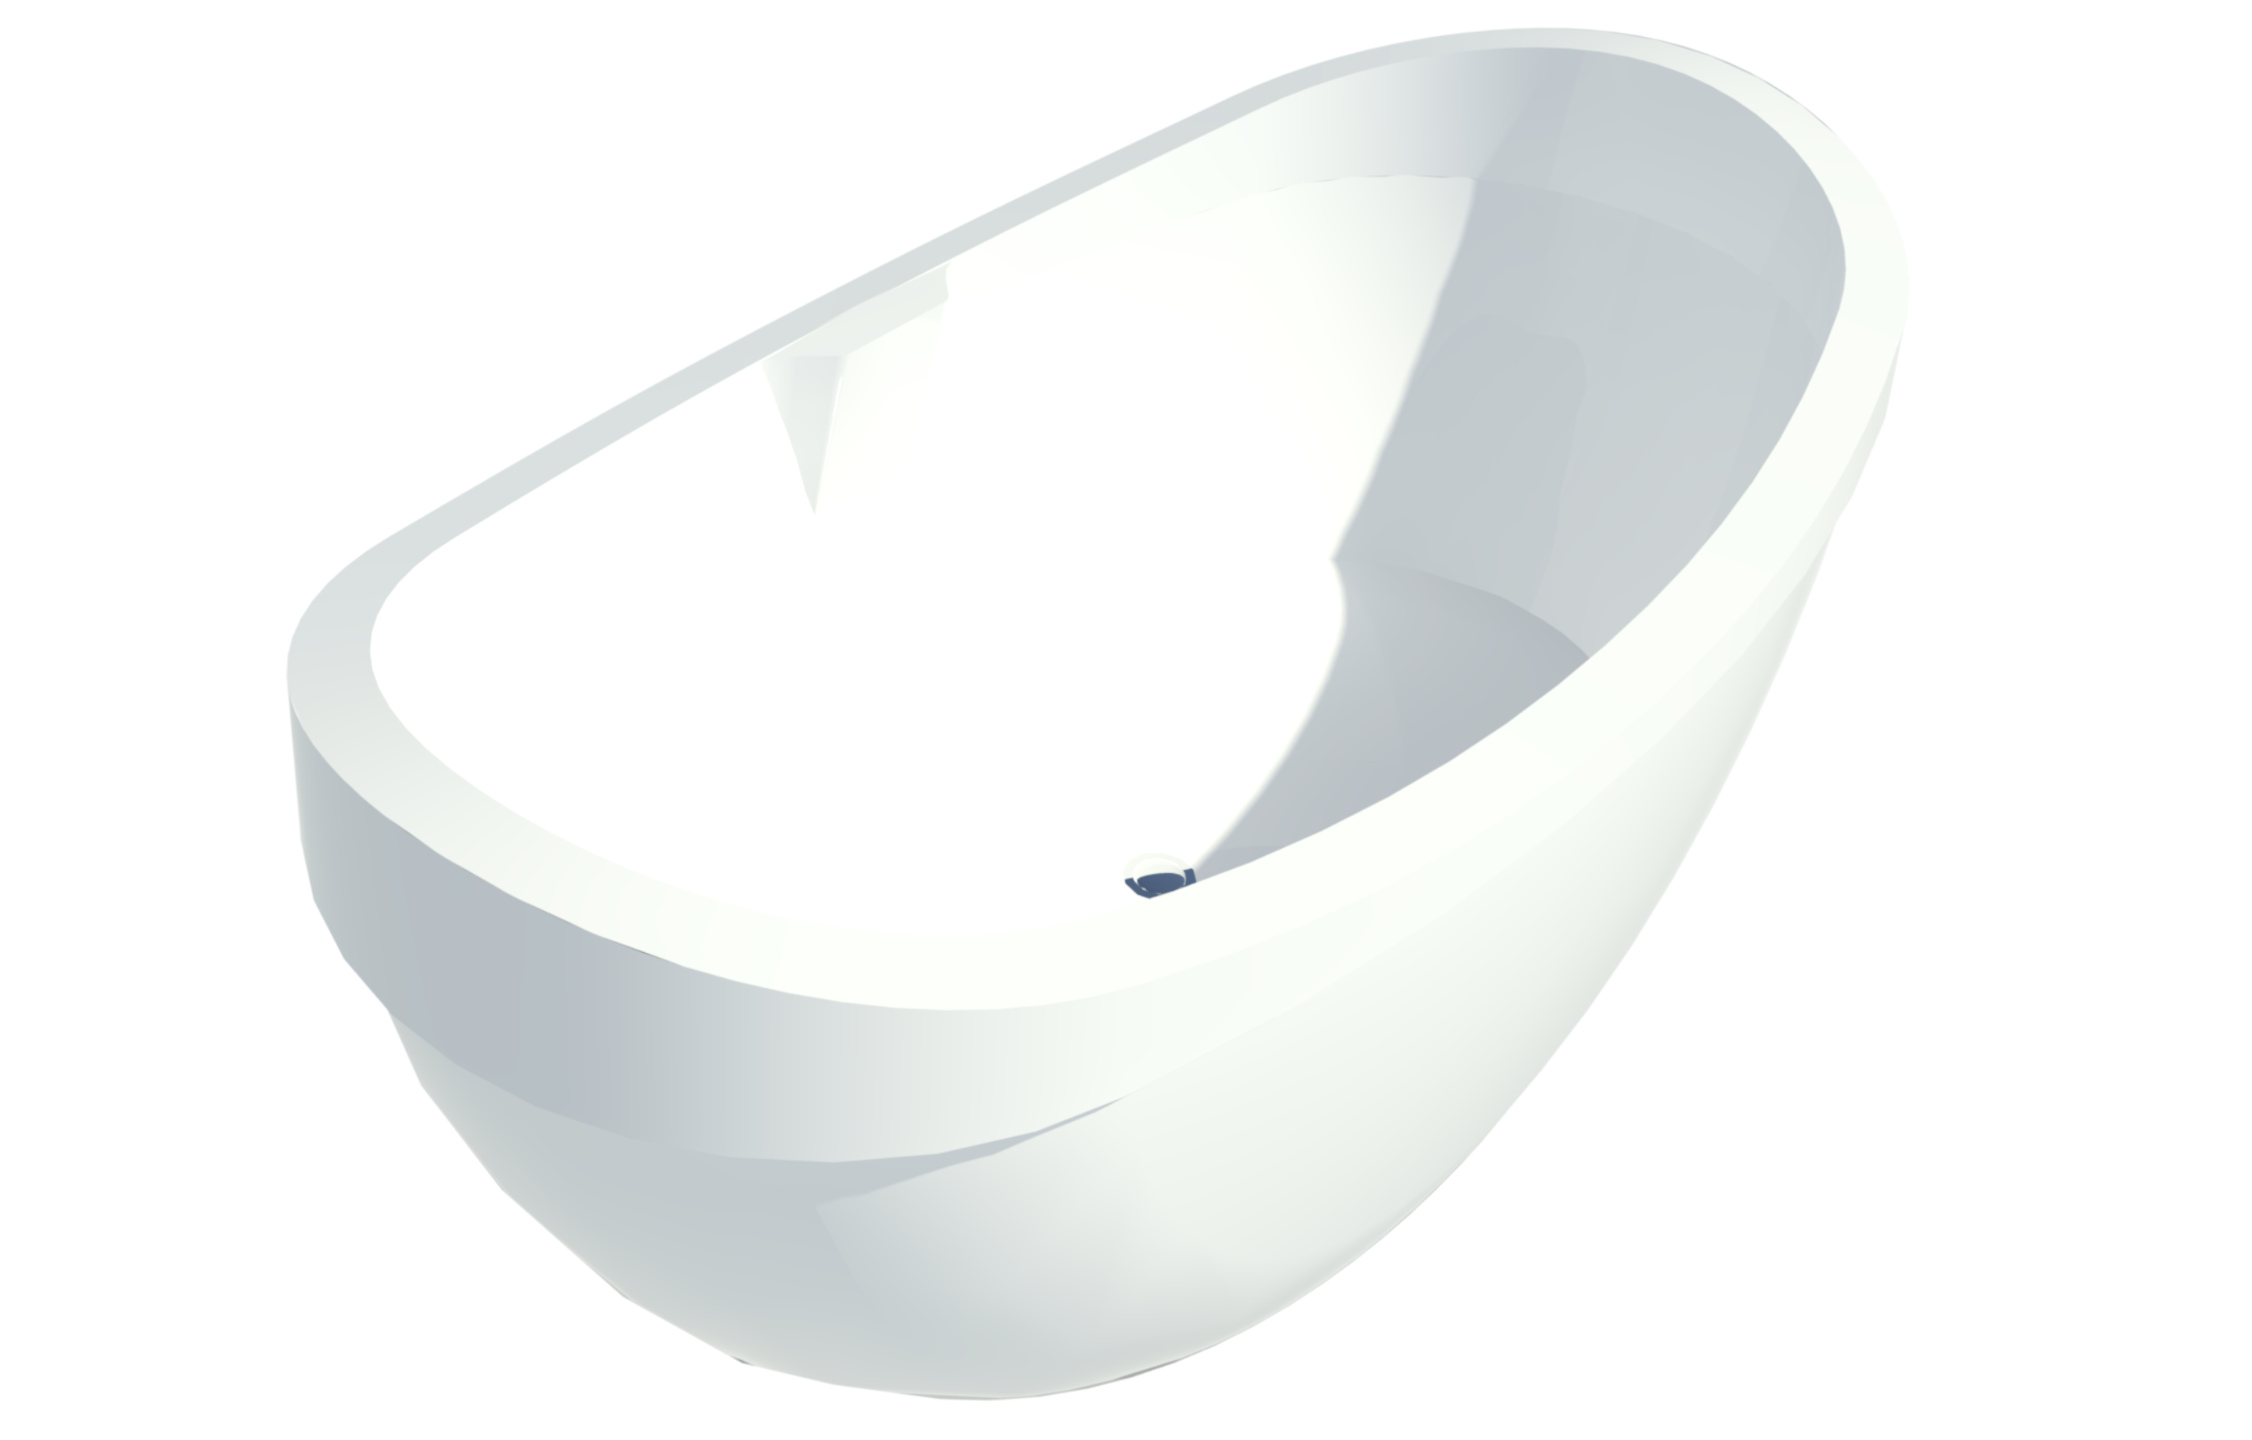 Revit raytrace showing a freestanding bathtub named Ava Duo from Mansfield in a white finish.